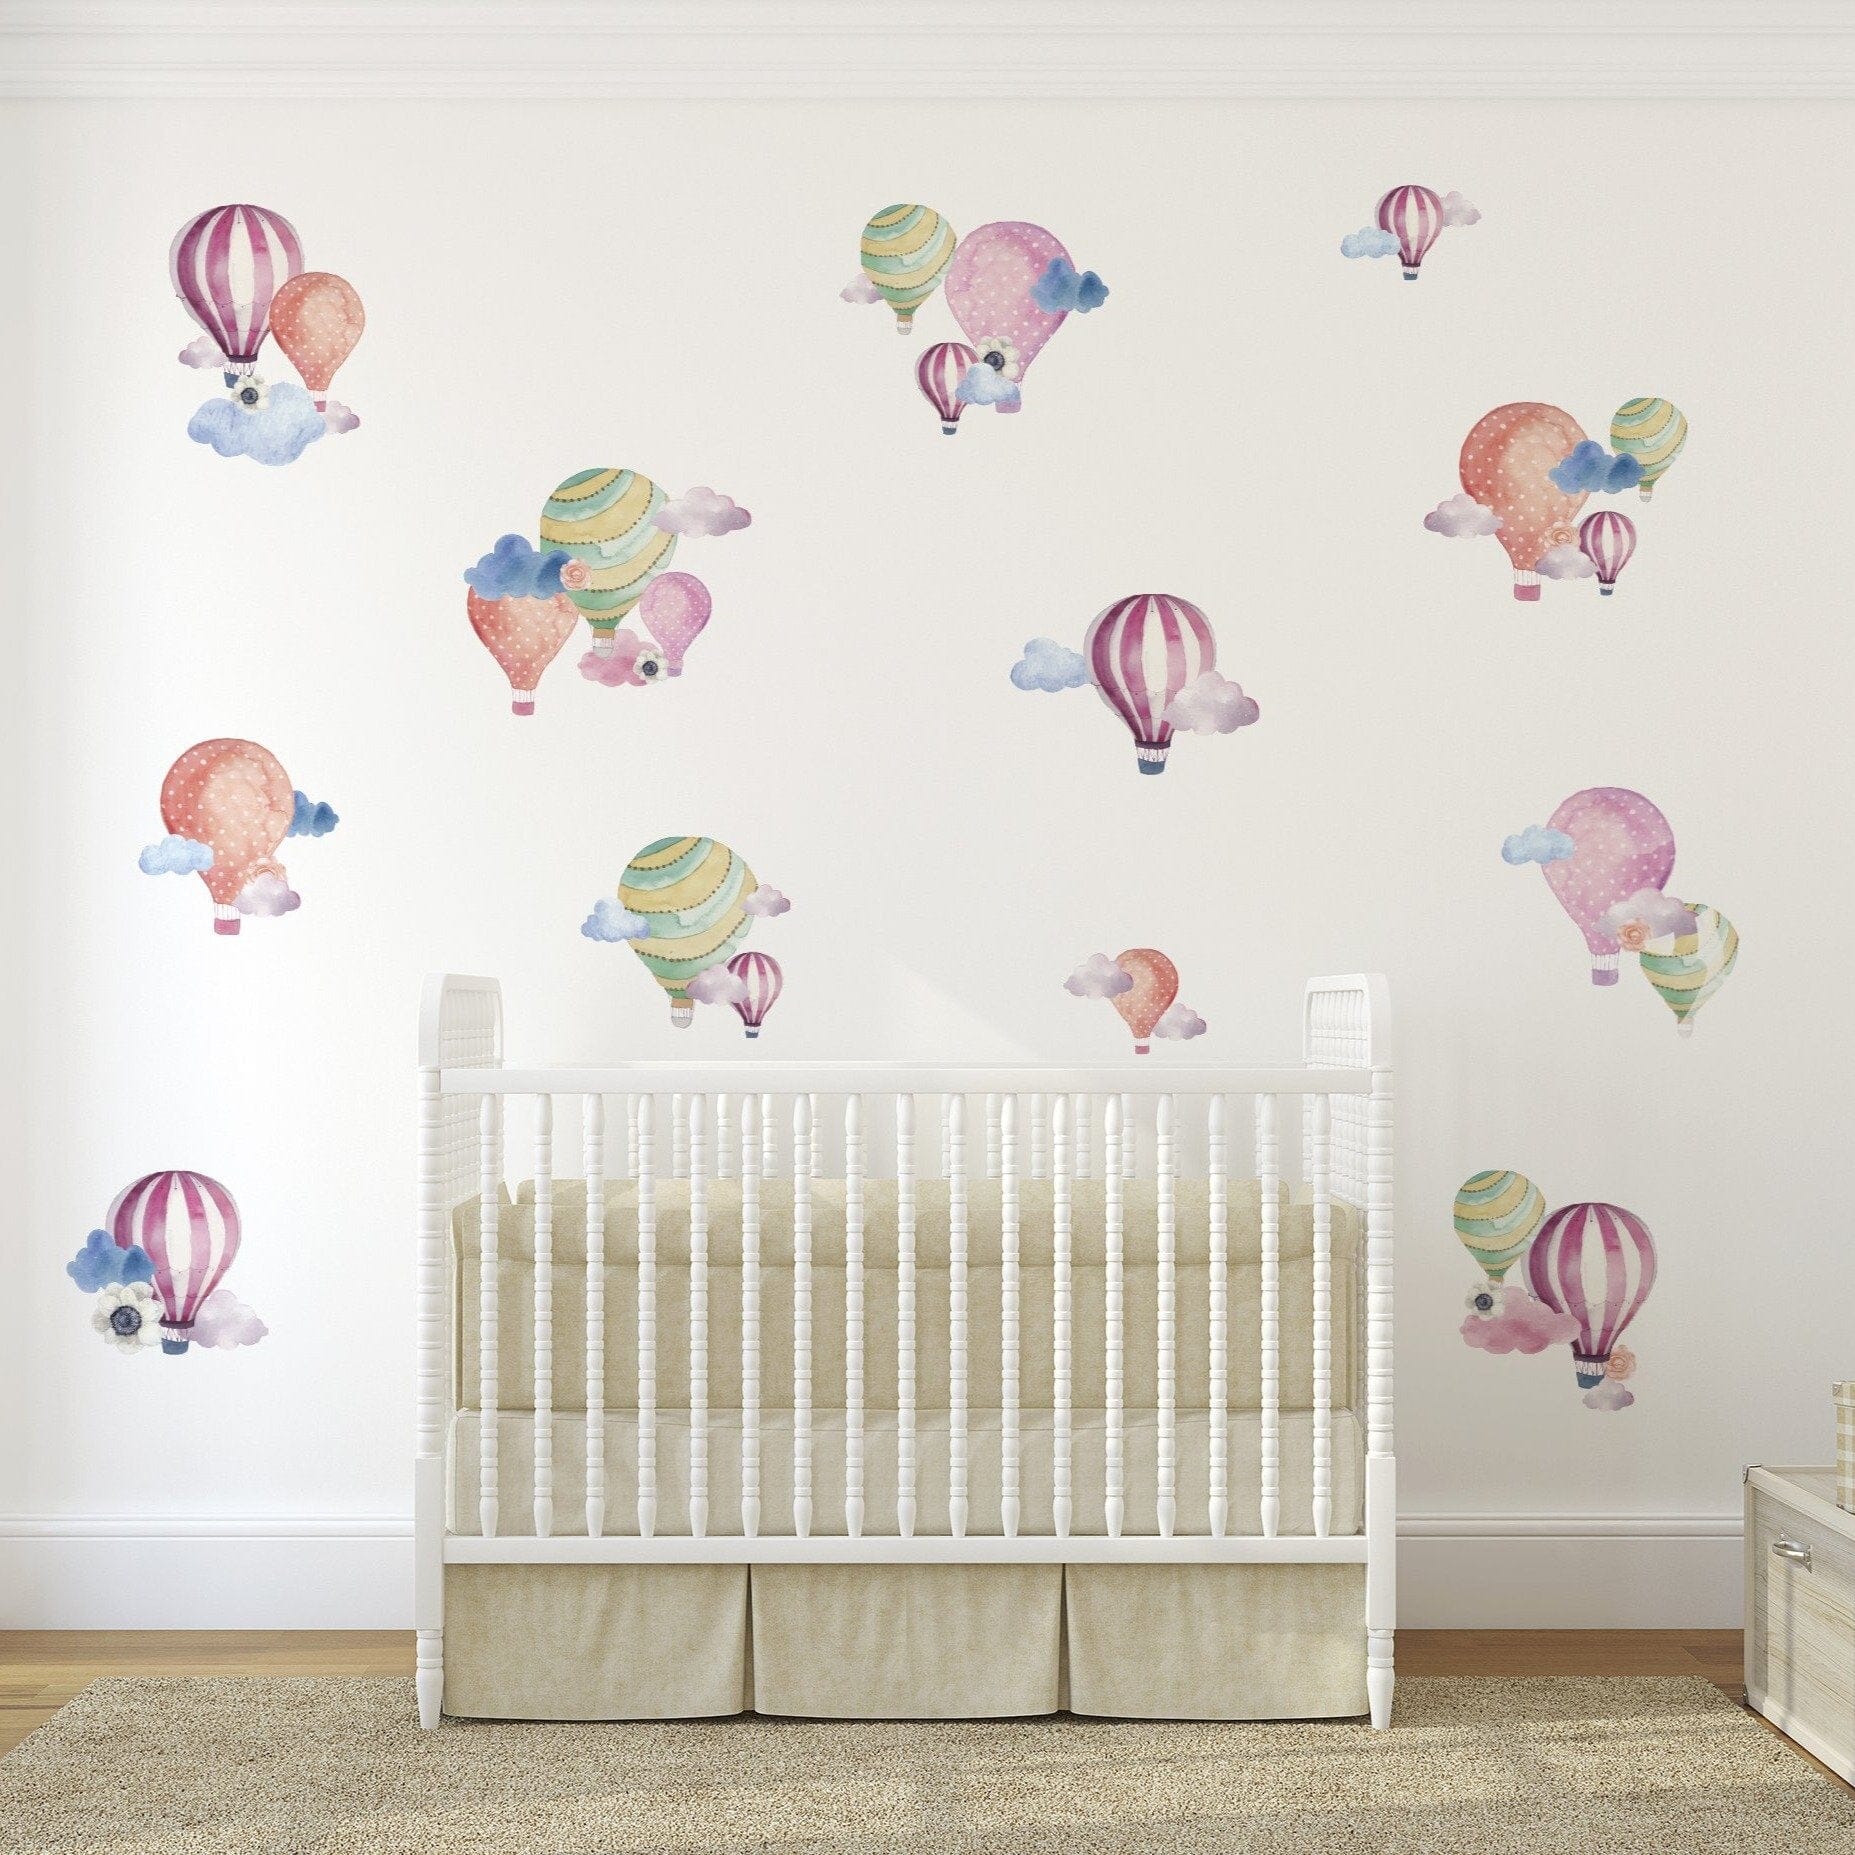 Wall Decals - Large Hot Air Balloon Stickers - Decorative Vinyl